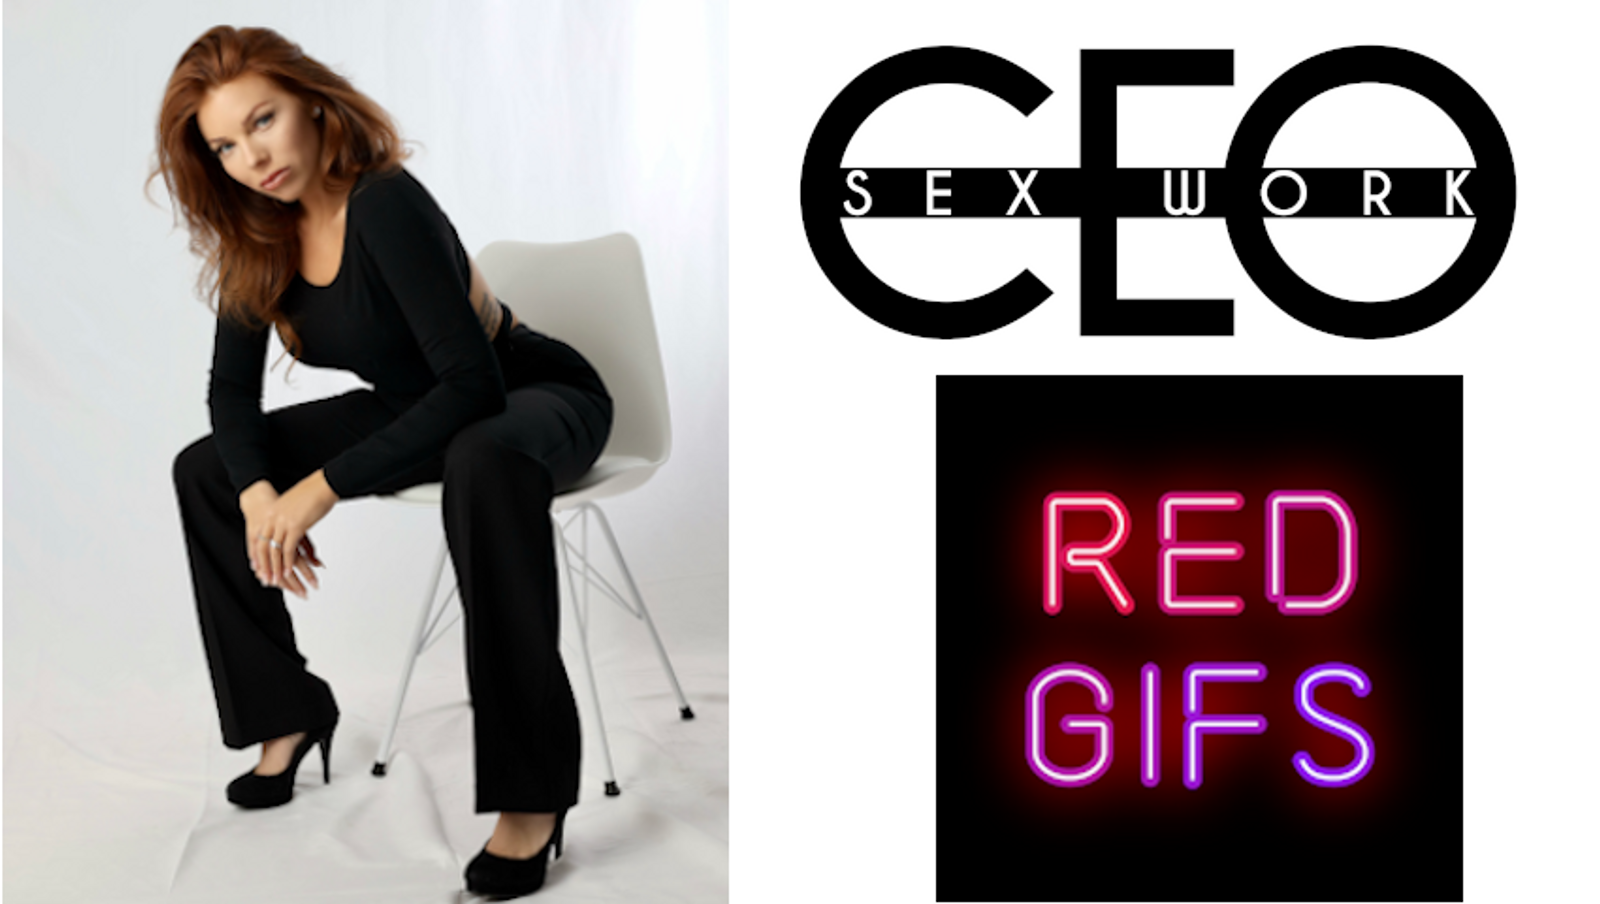 Sex Work CEO, RedGifs Partner on New Educational Course